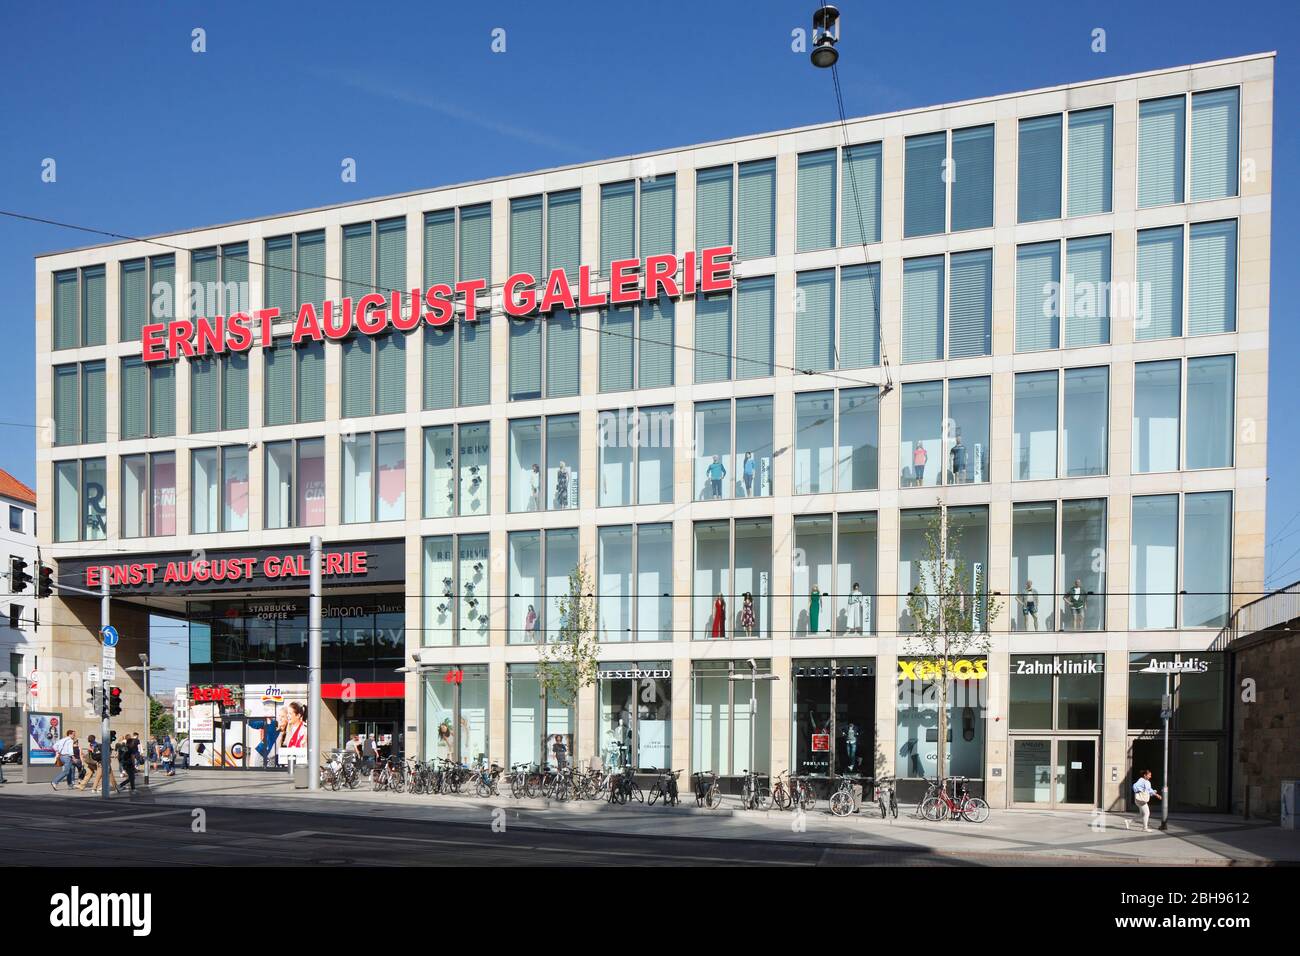 Ernst august galerie hi-res stock photography and images - Alamy